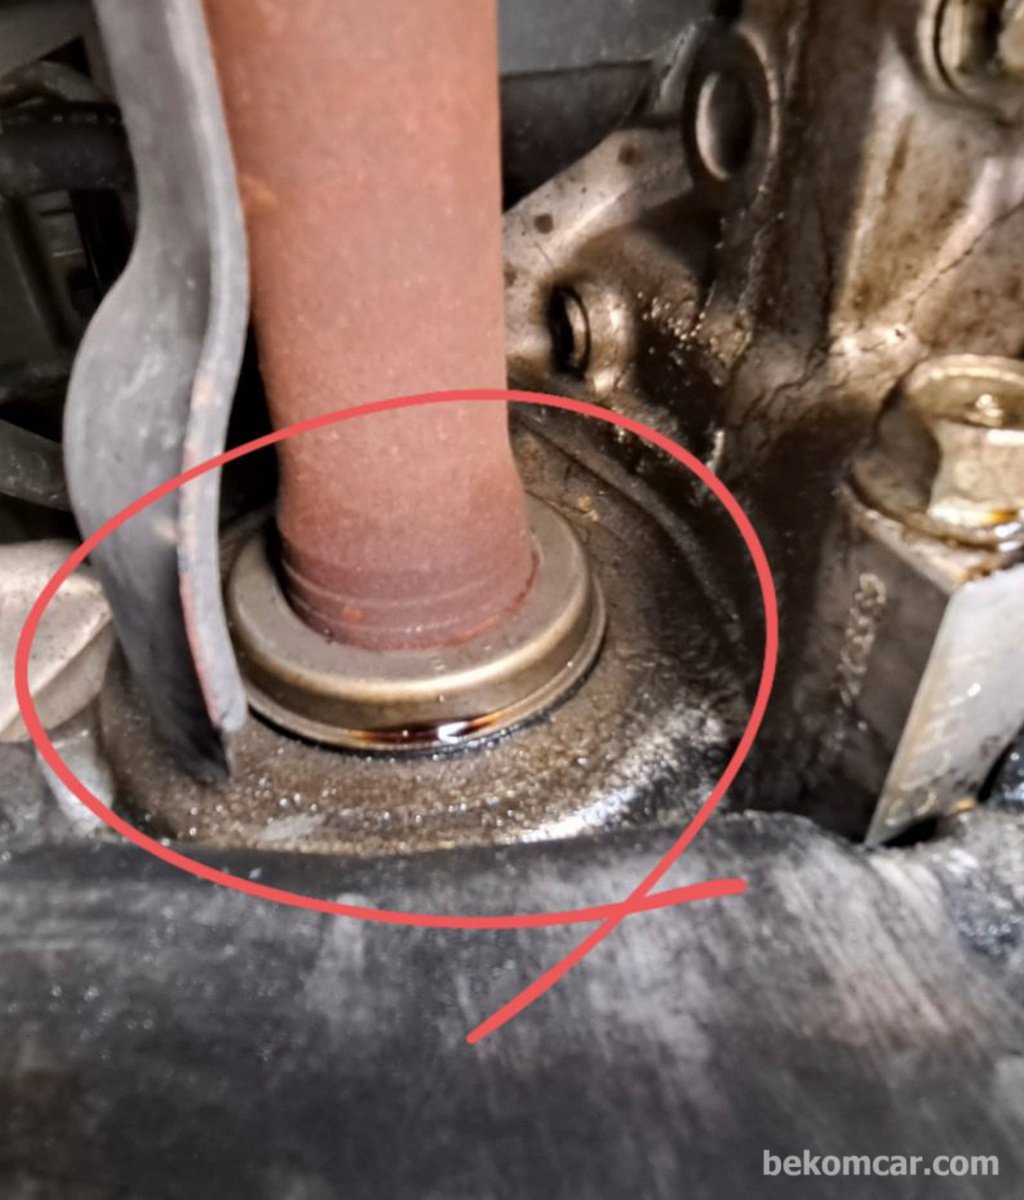 Look for any oil leaks underneath the car during inspection|bekomcar.com